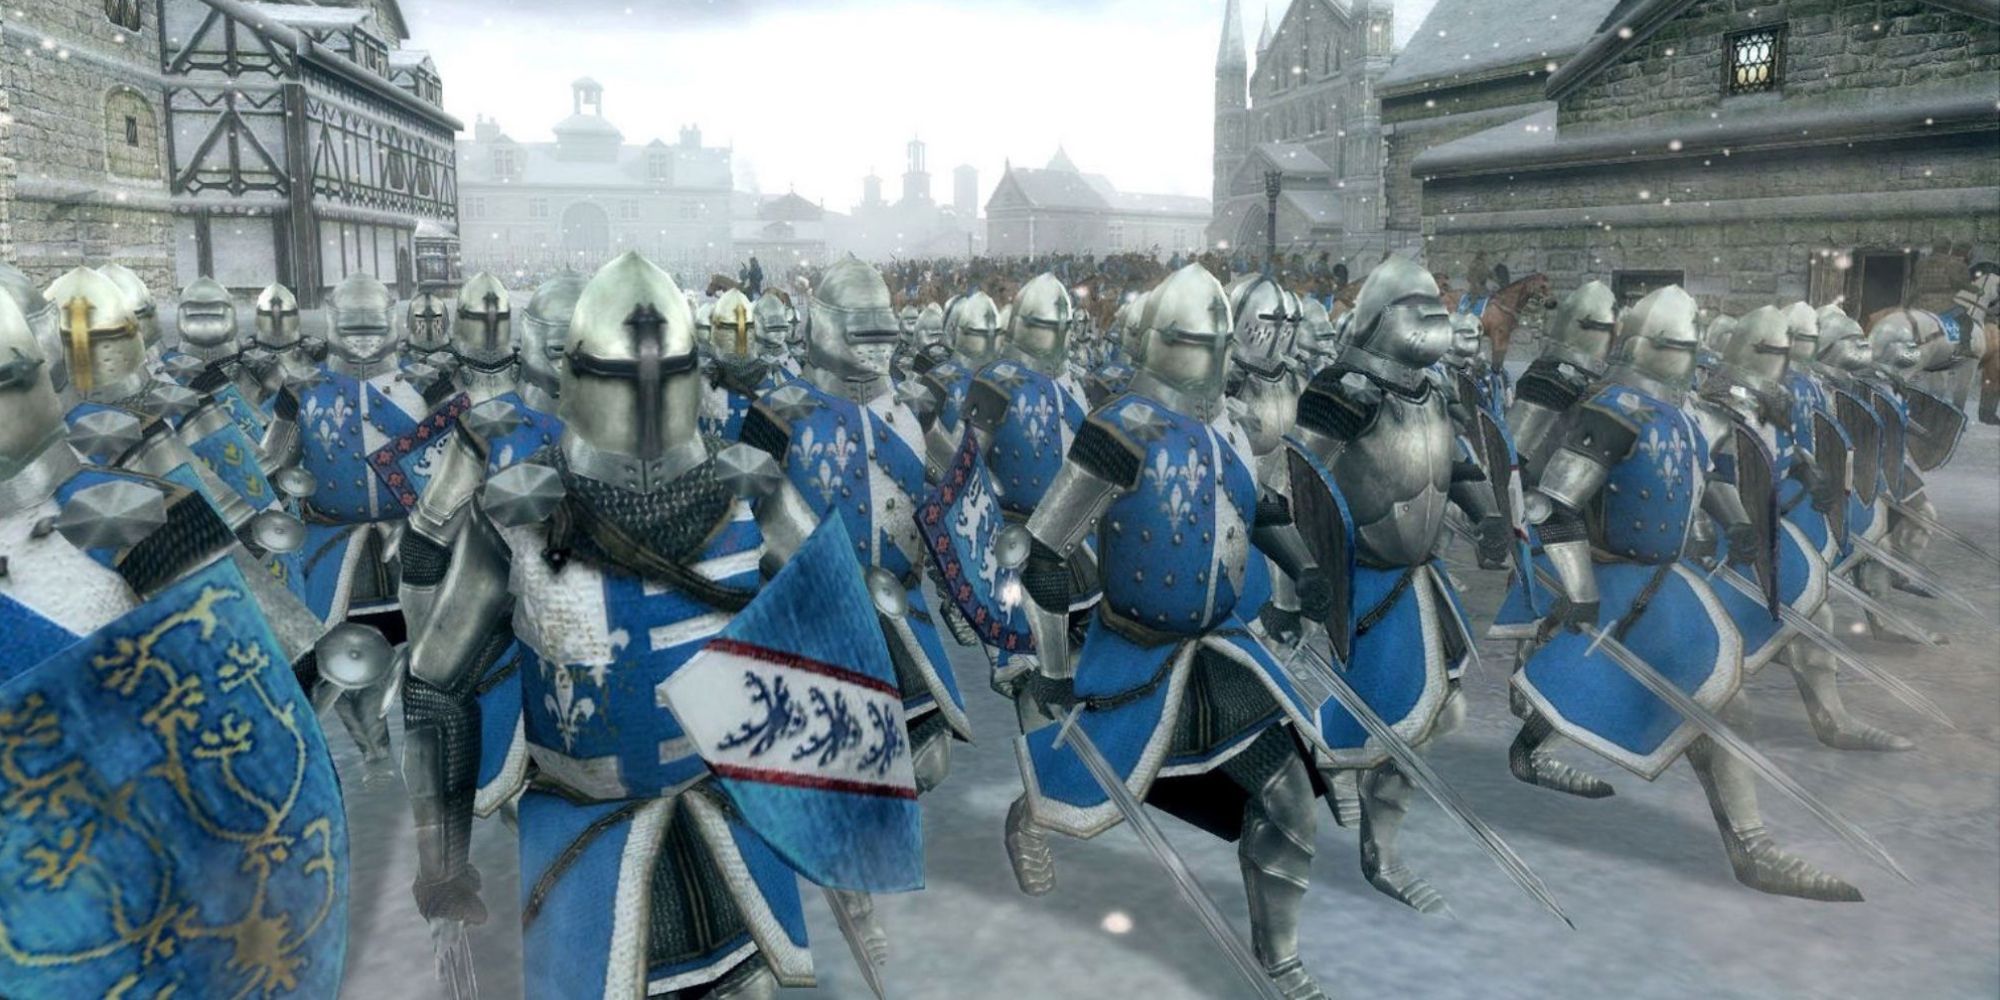 a wide shot of a group of knights clad in blue and white armour wielding swords and shields walking through a snow covered village